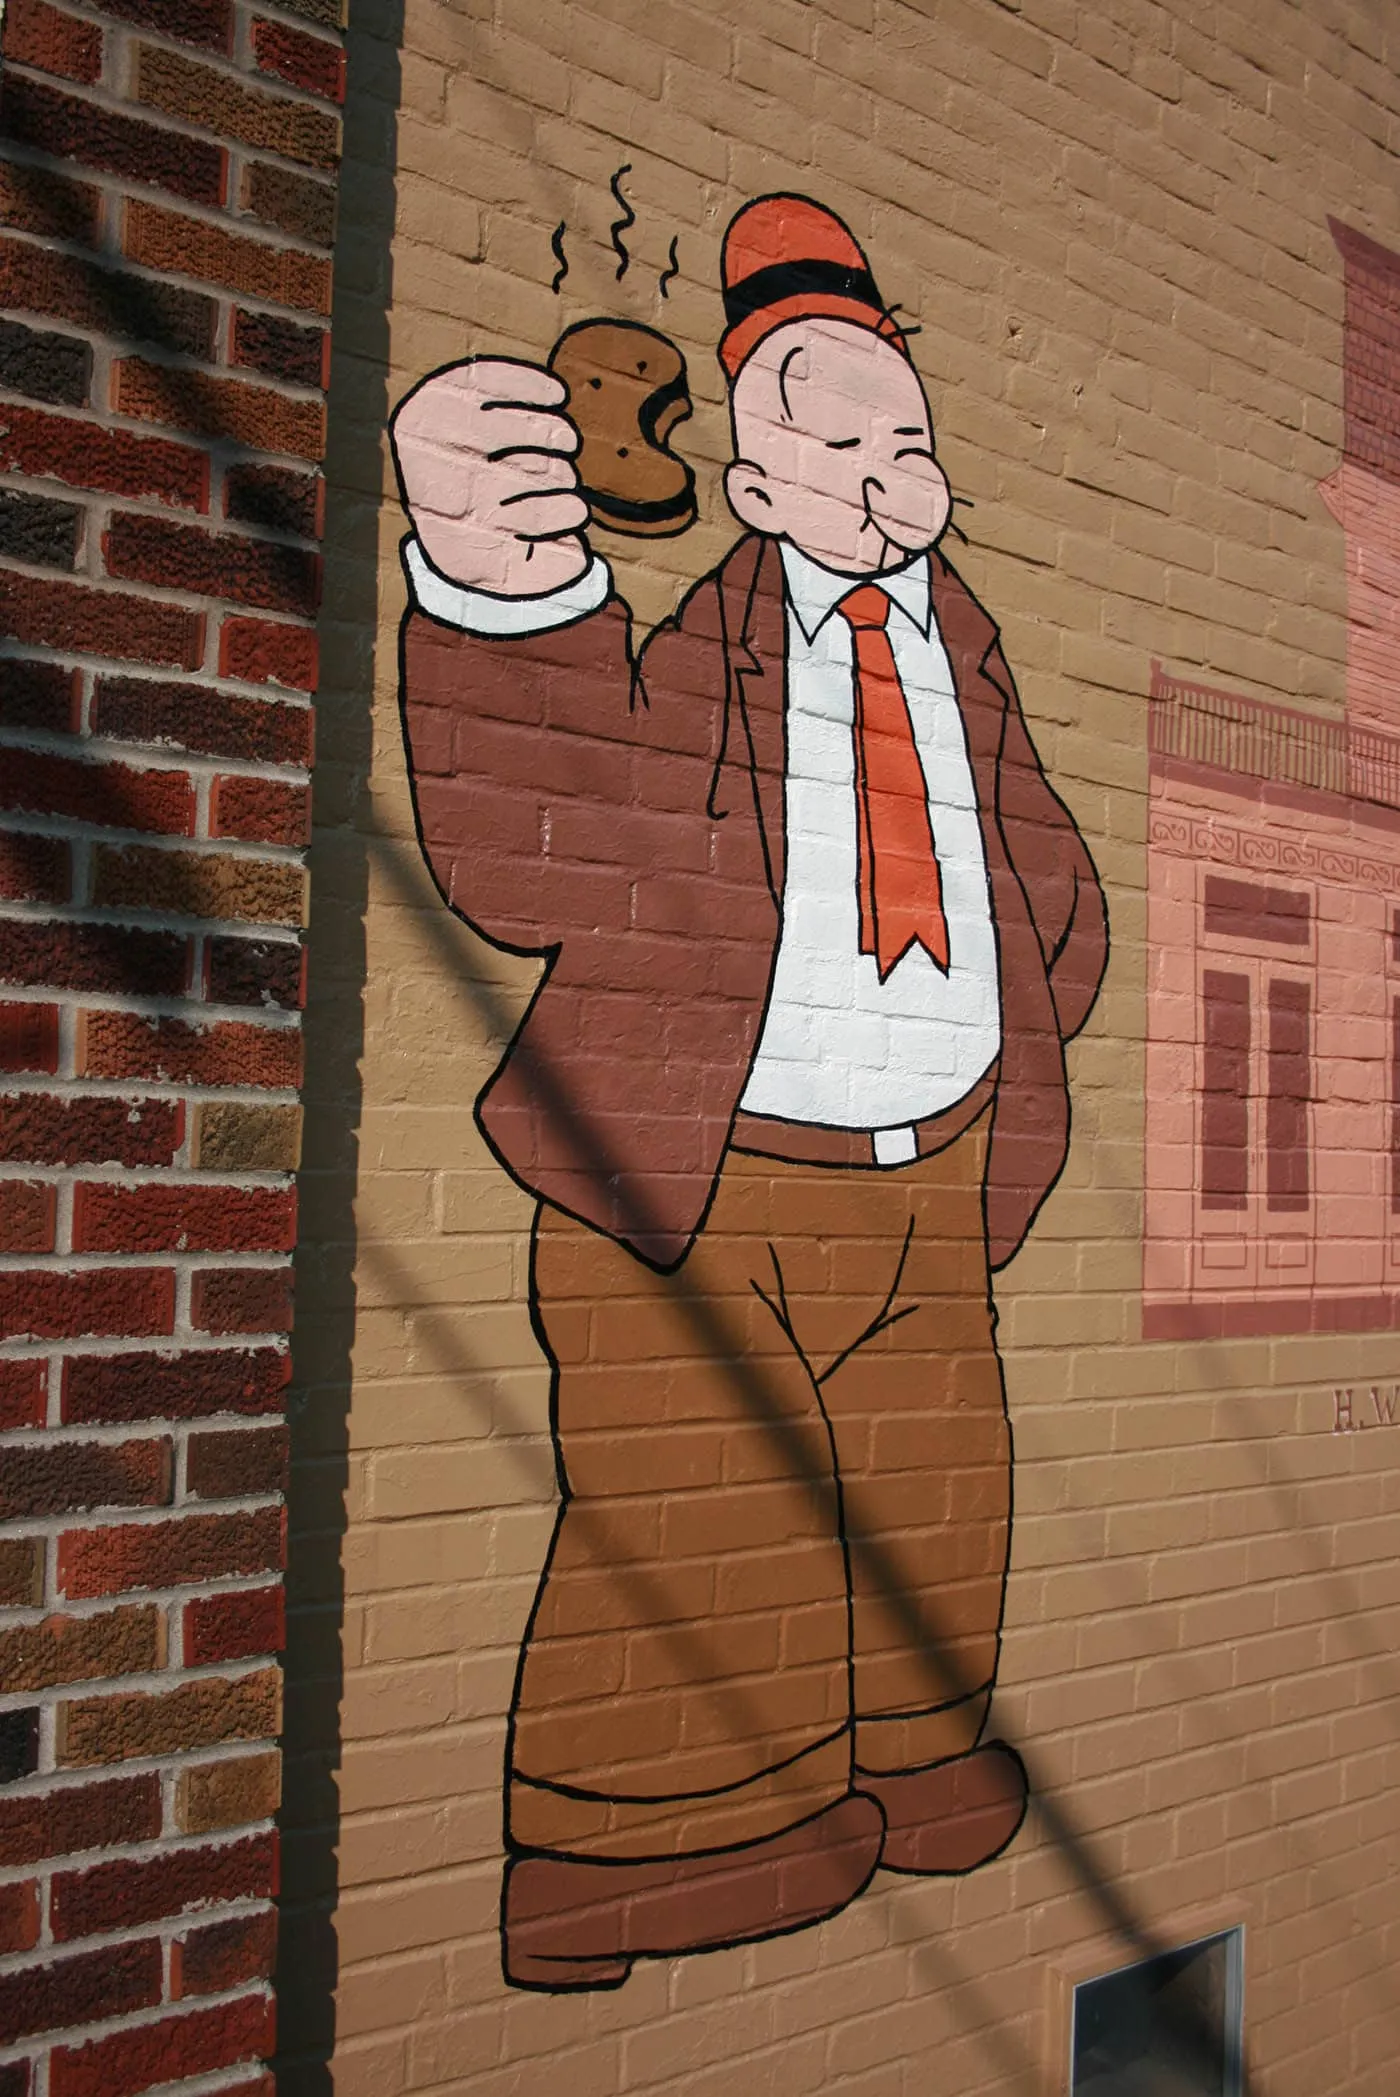 Popeye Mural in Chester, Illinois shows Wimpy eating a hamburger